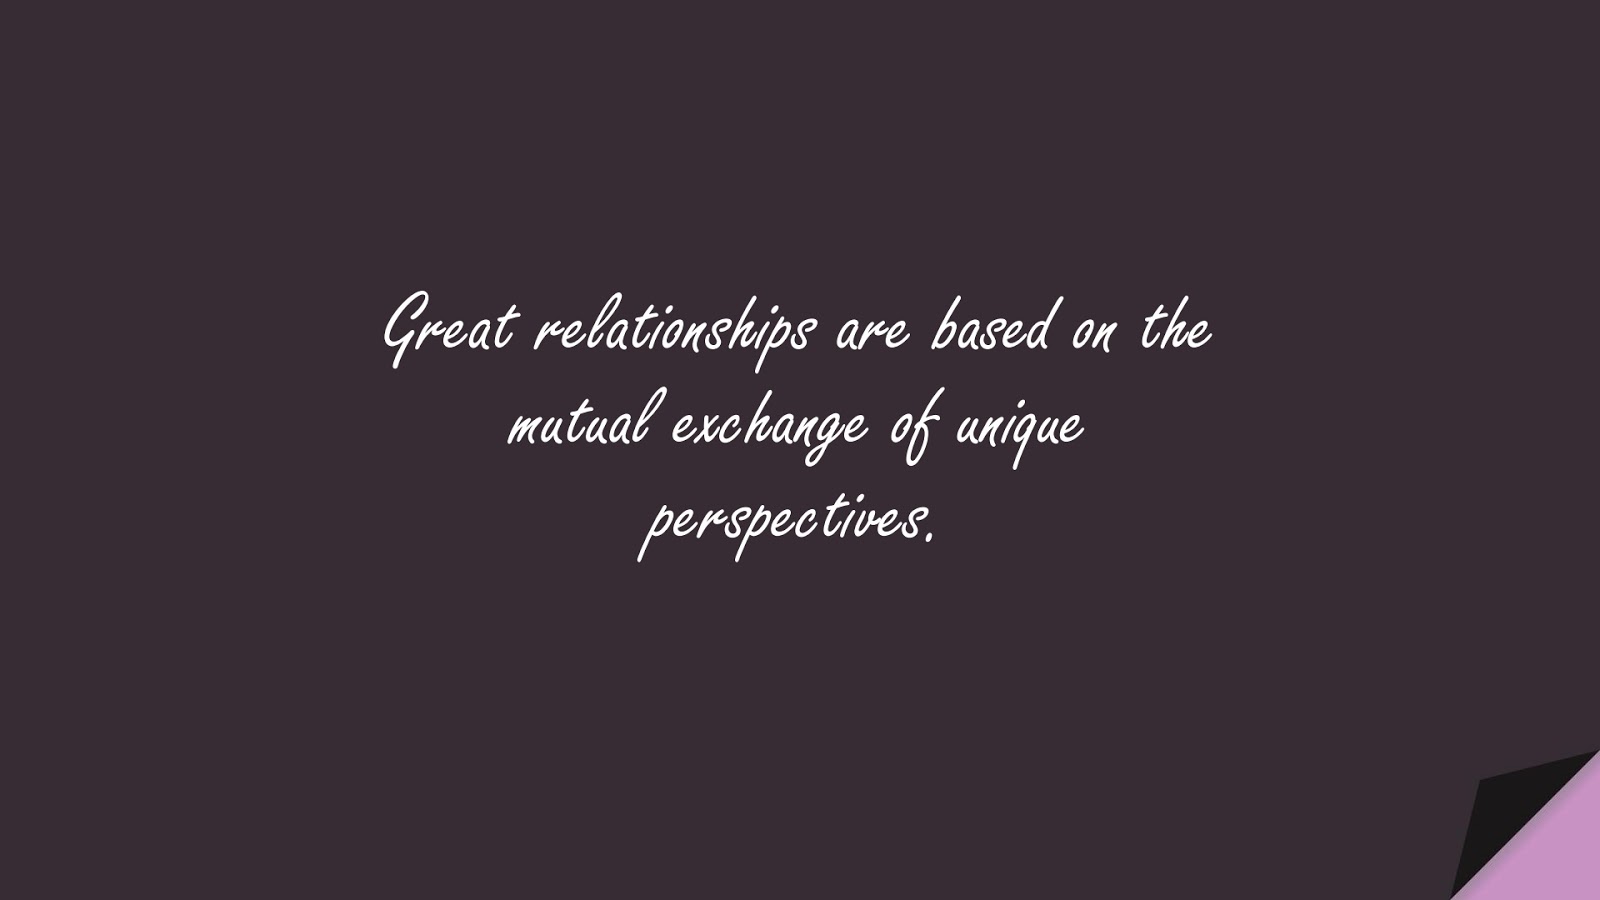 Great relationships are based on the mutual exchange of unique perspectives.FALSE